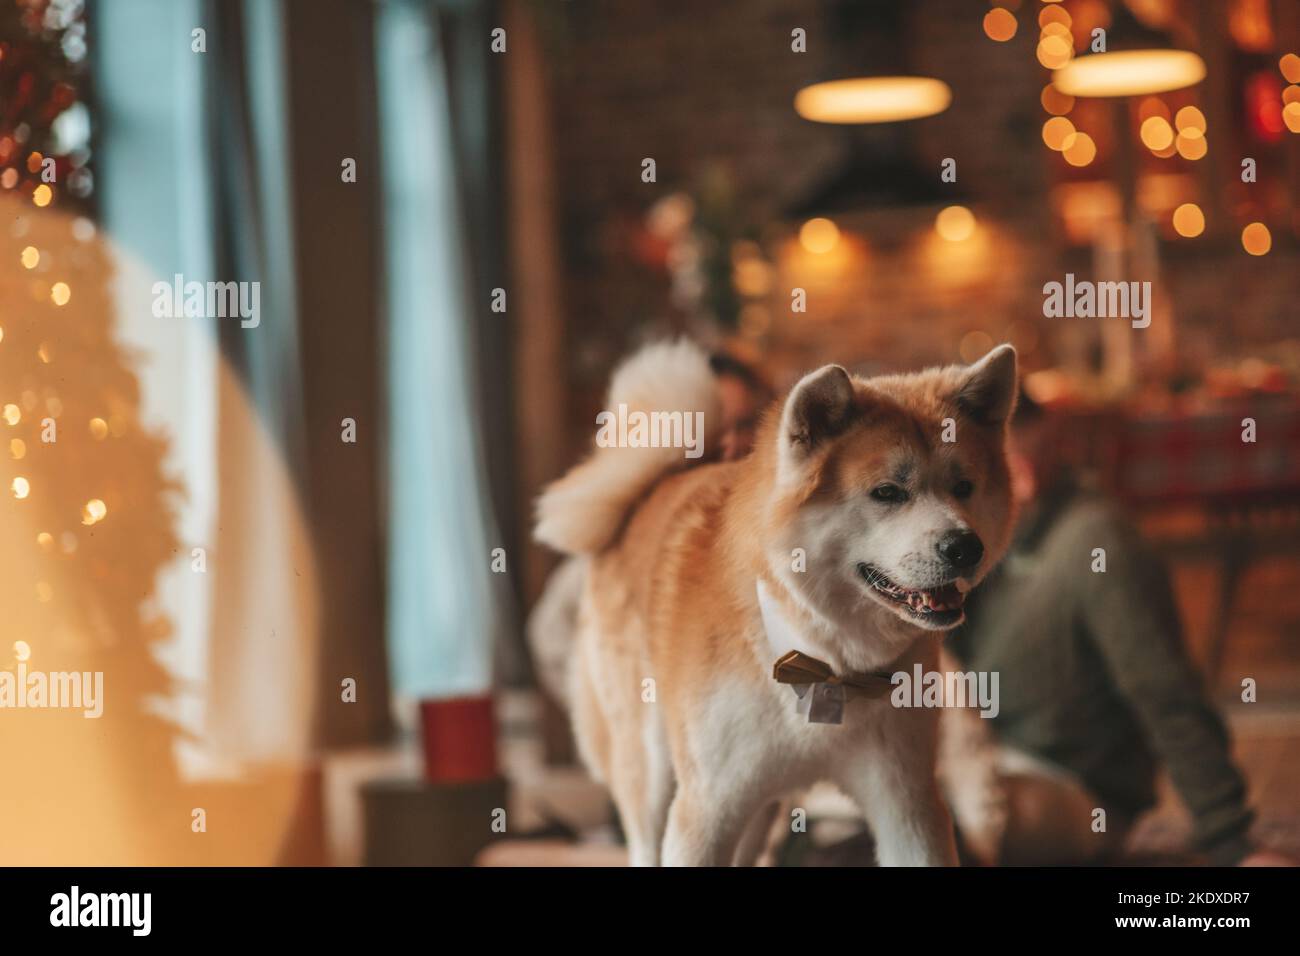 A Dog's Love Is Legendary - A Faithful Dog Named Hachi Images From Hachi:  